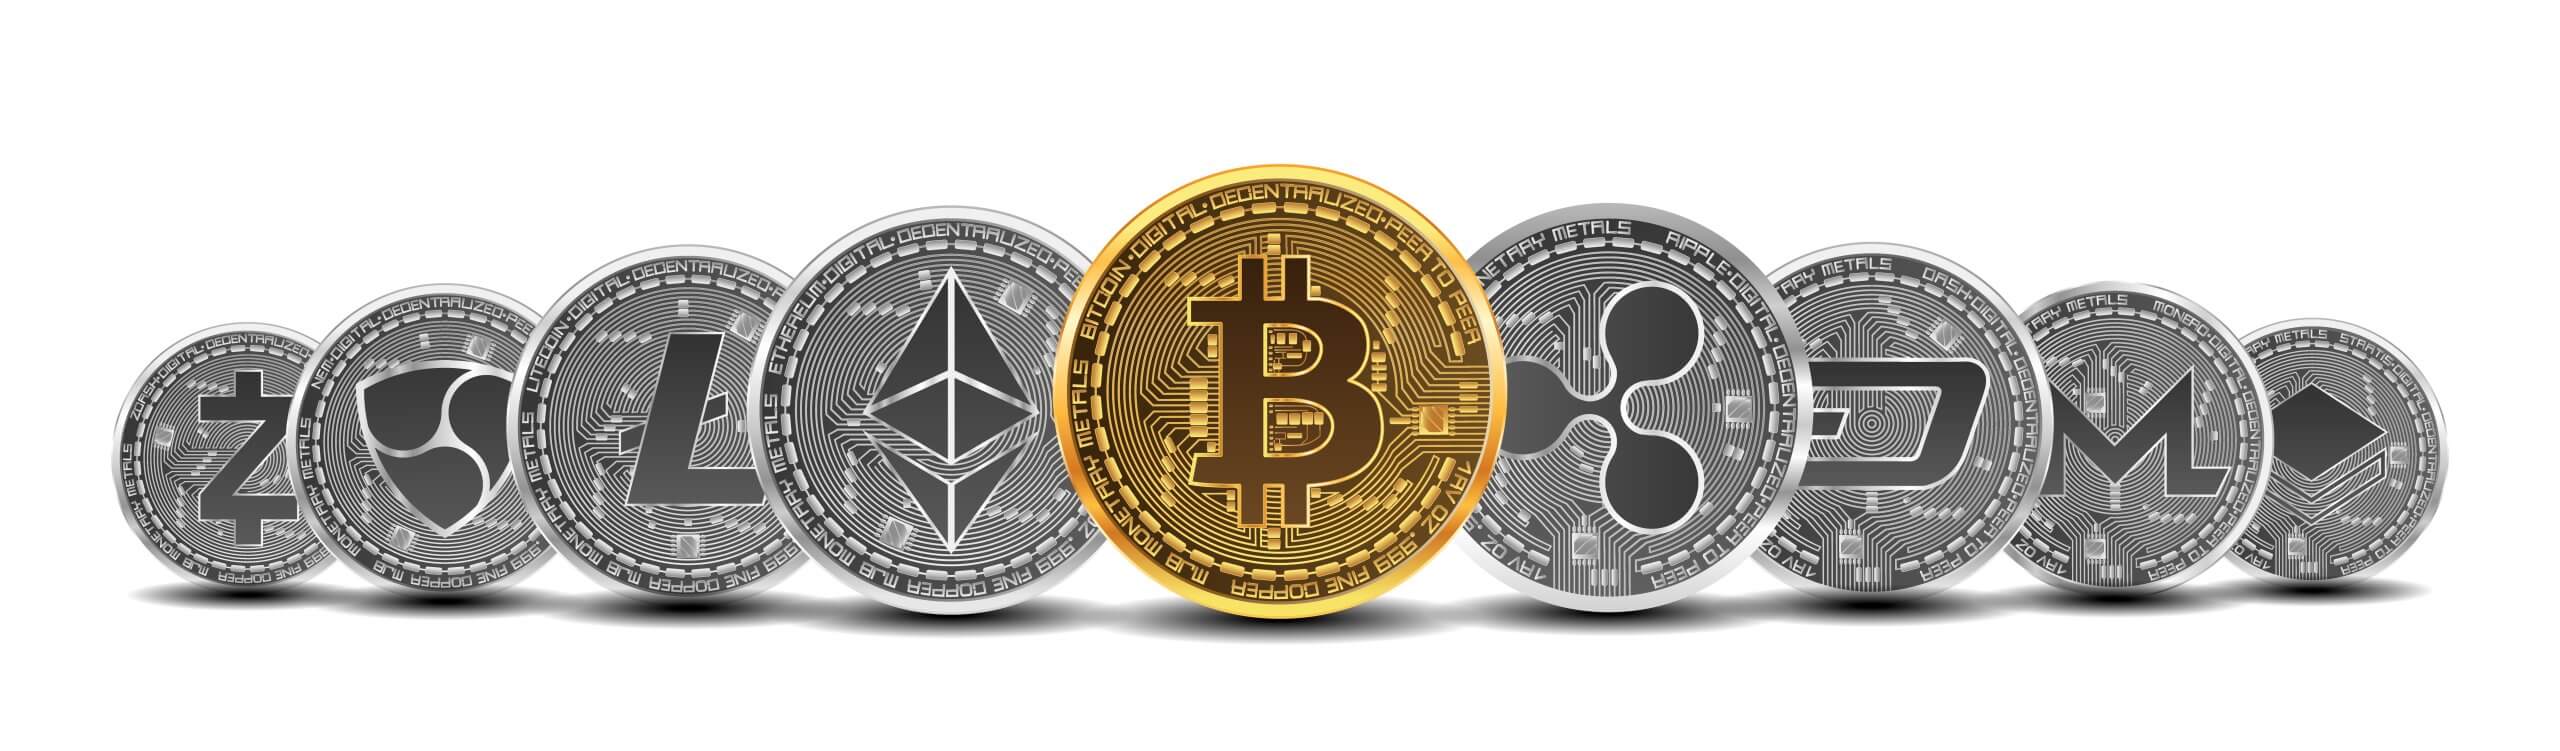 crypto currencies logos on coins